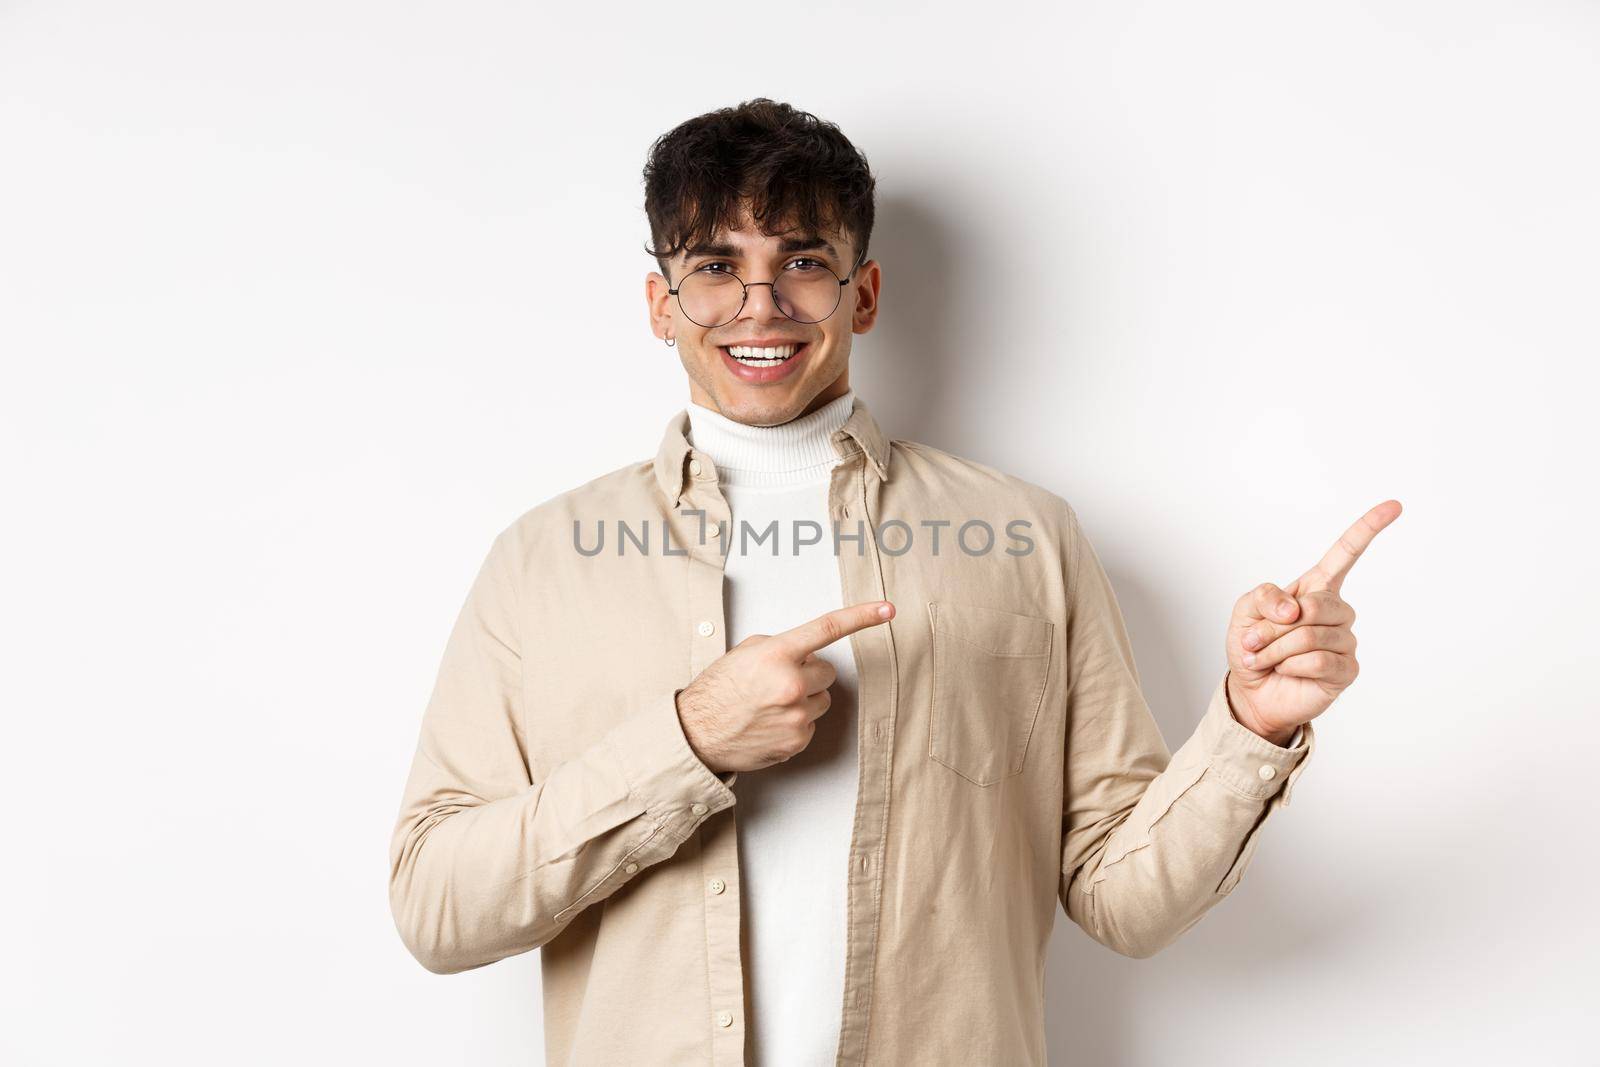 Proud and happy young man in glasses showing logo, pointing fingers at upper right corner and smiling, standing on white background.